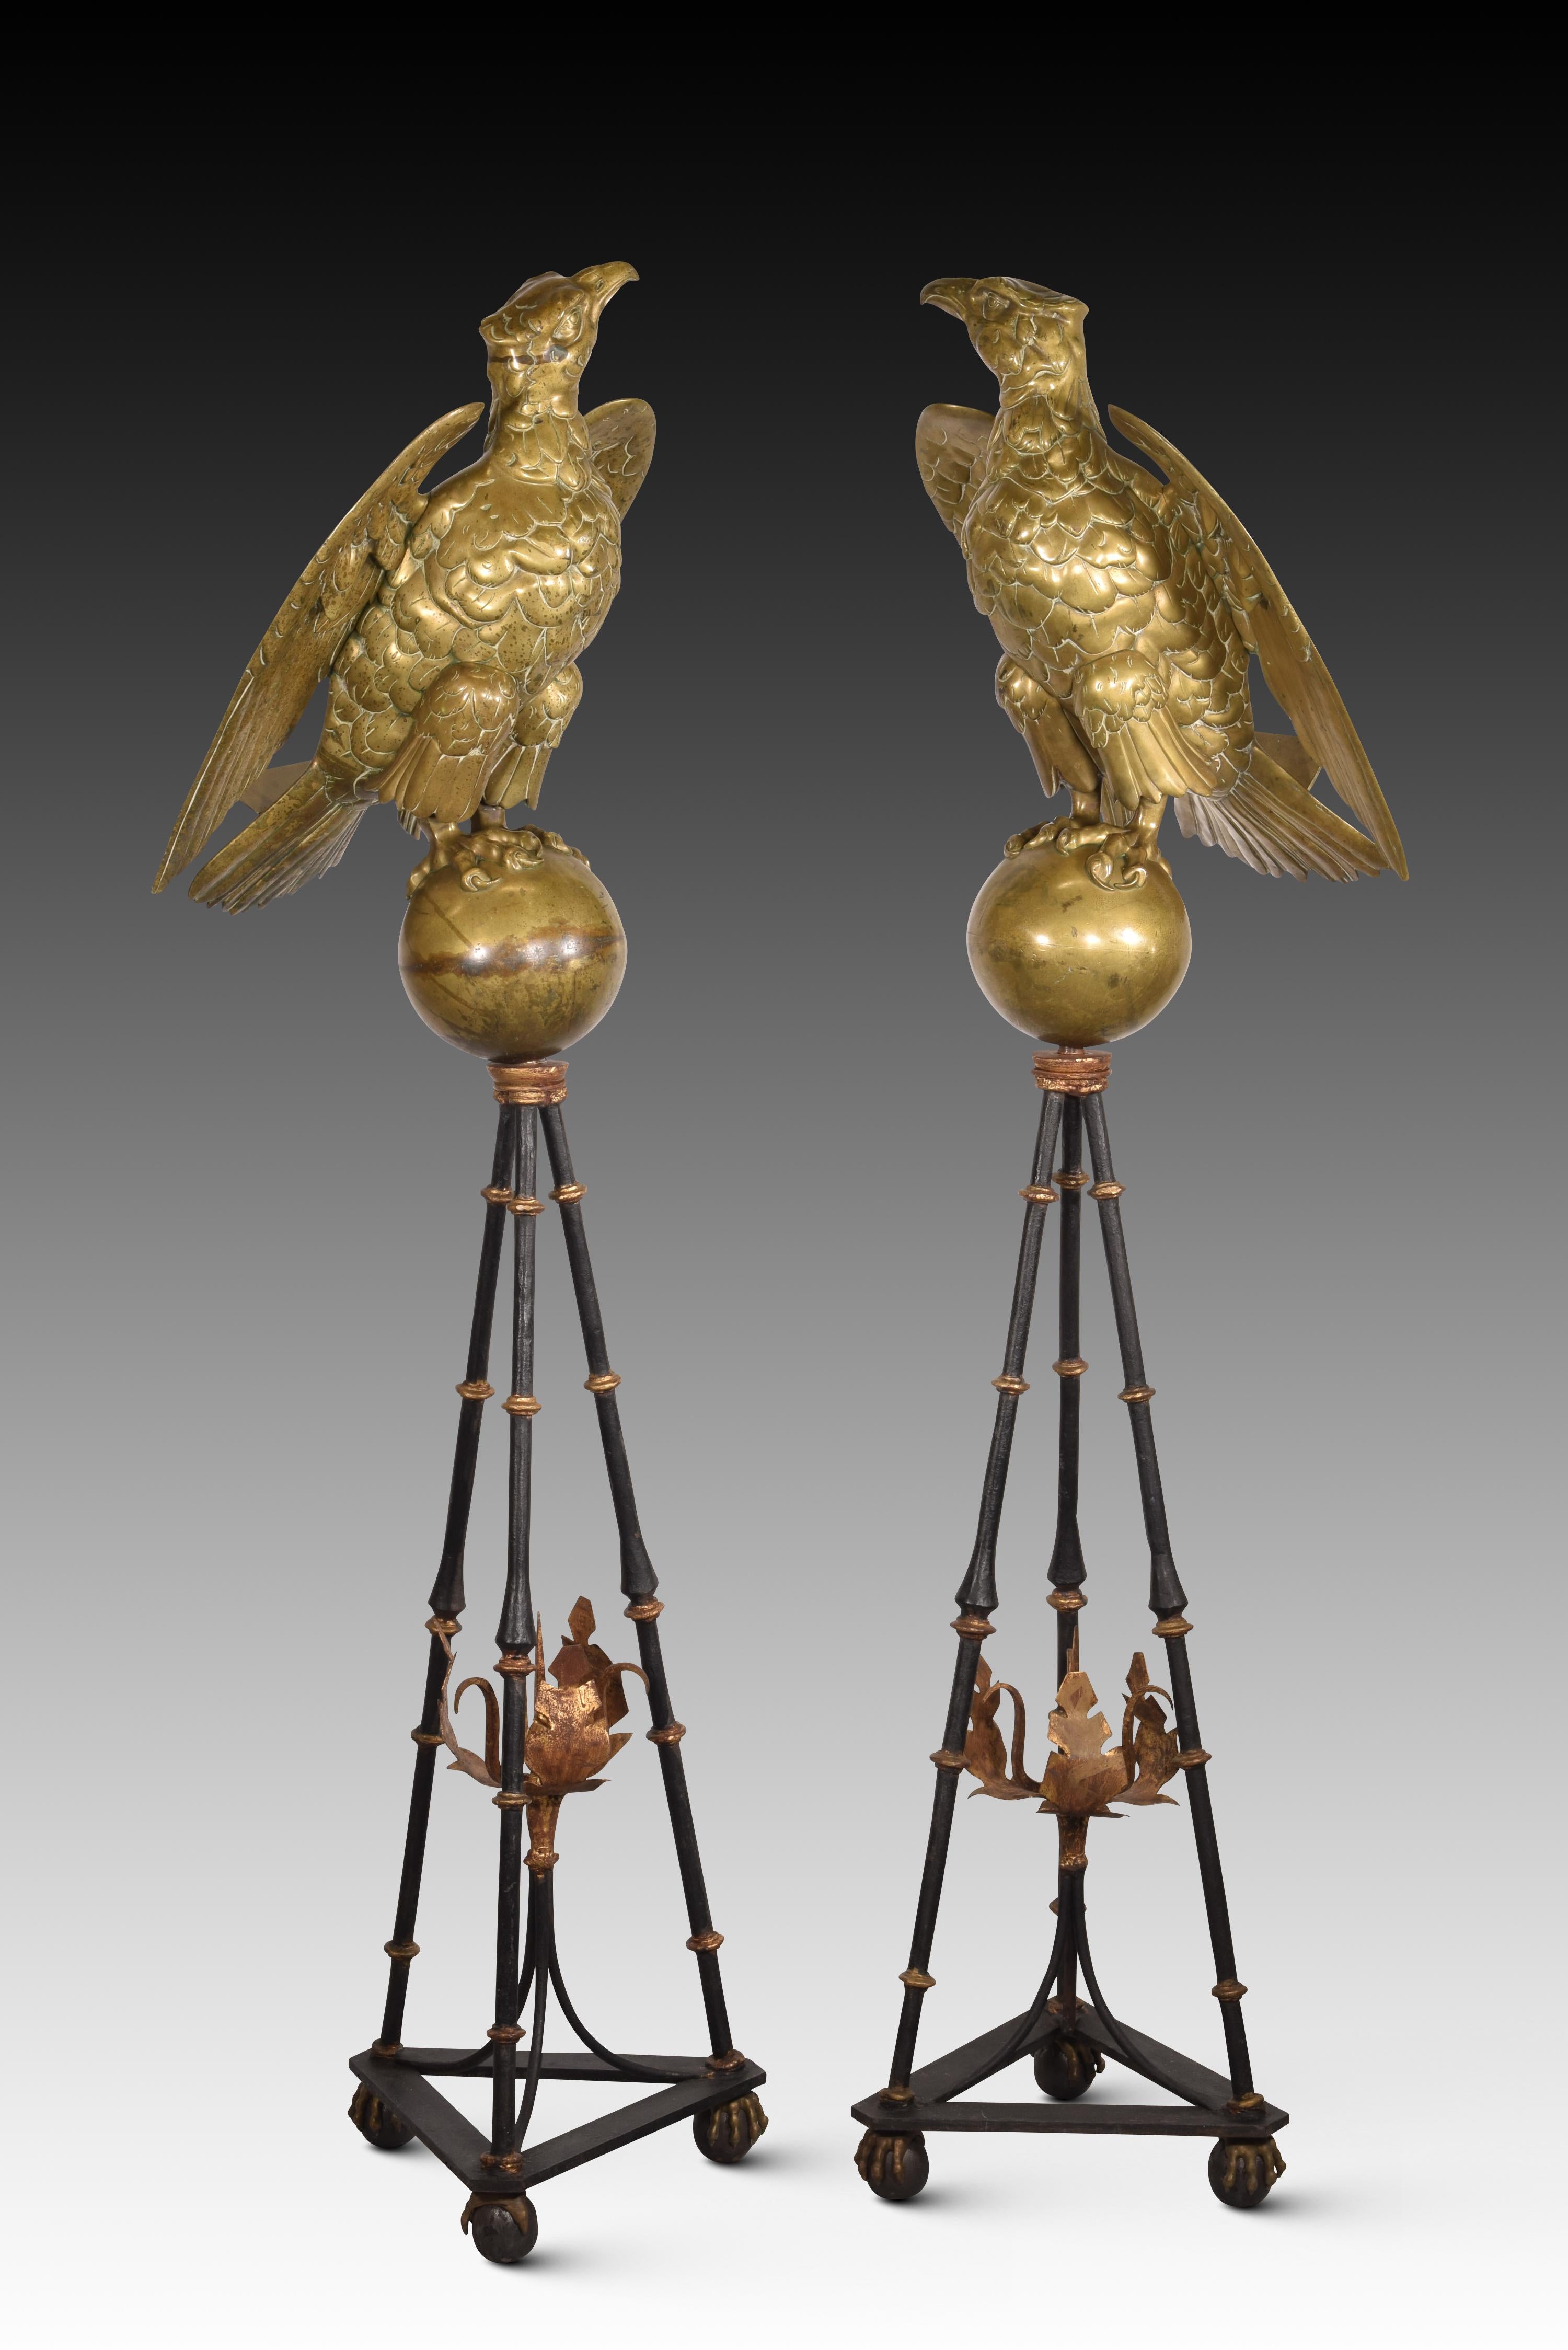 Renaissance Pair of Tall Eagle Lecterns, Bronze, Etc, 16th Century and Later For Sale